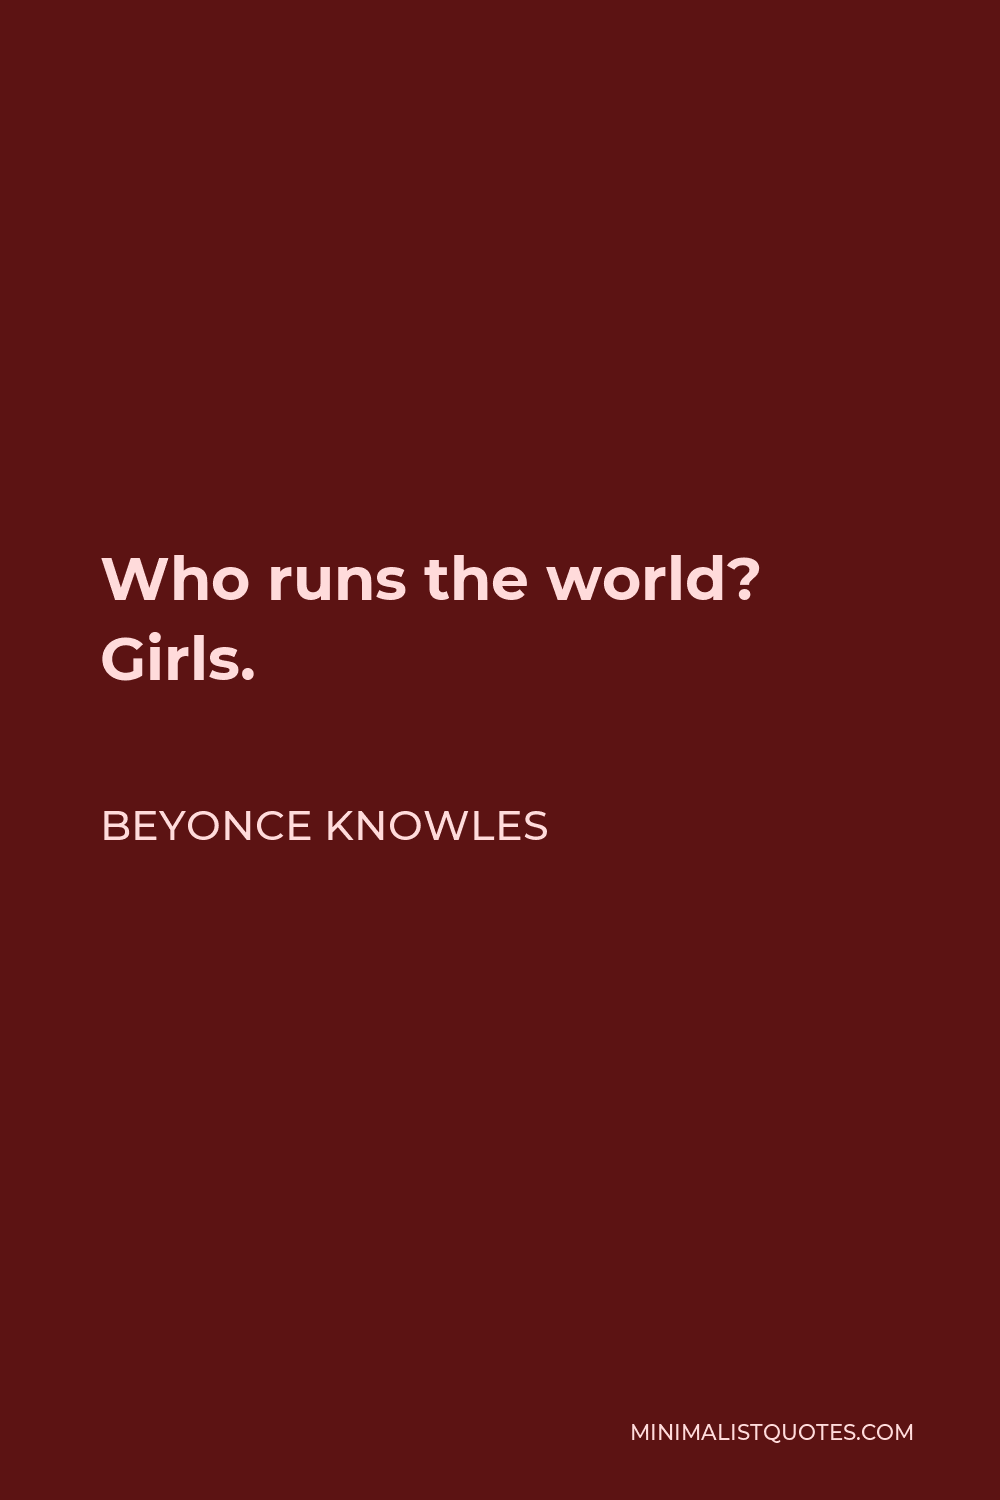 Beyonce Knowles Quote - Who runs the world? Girls.